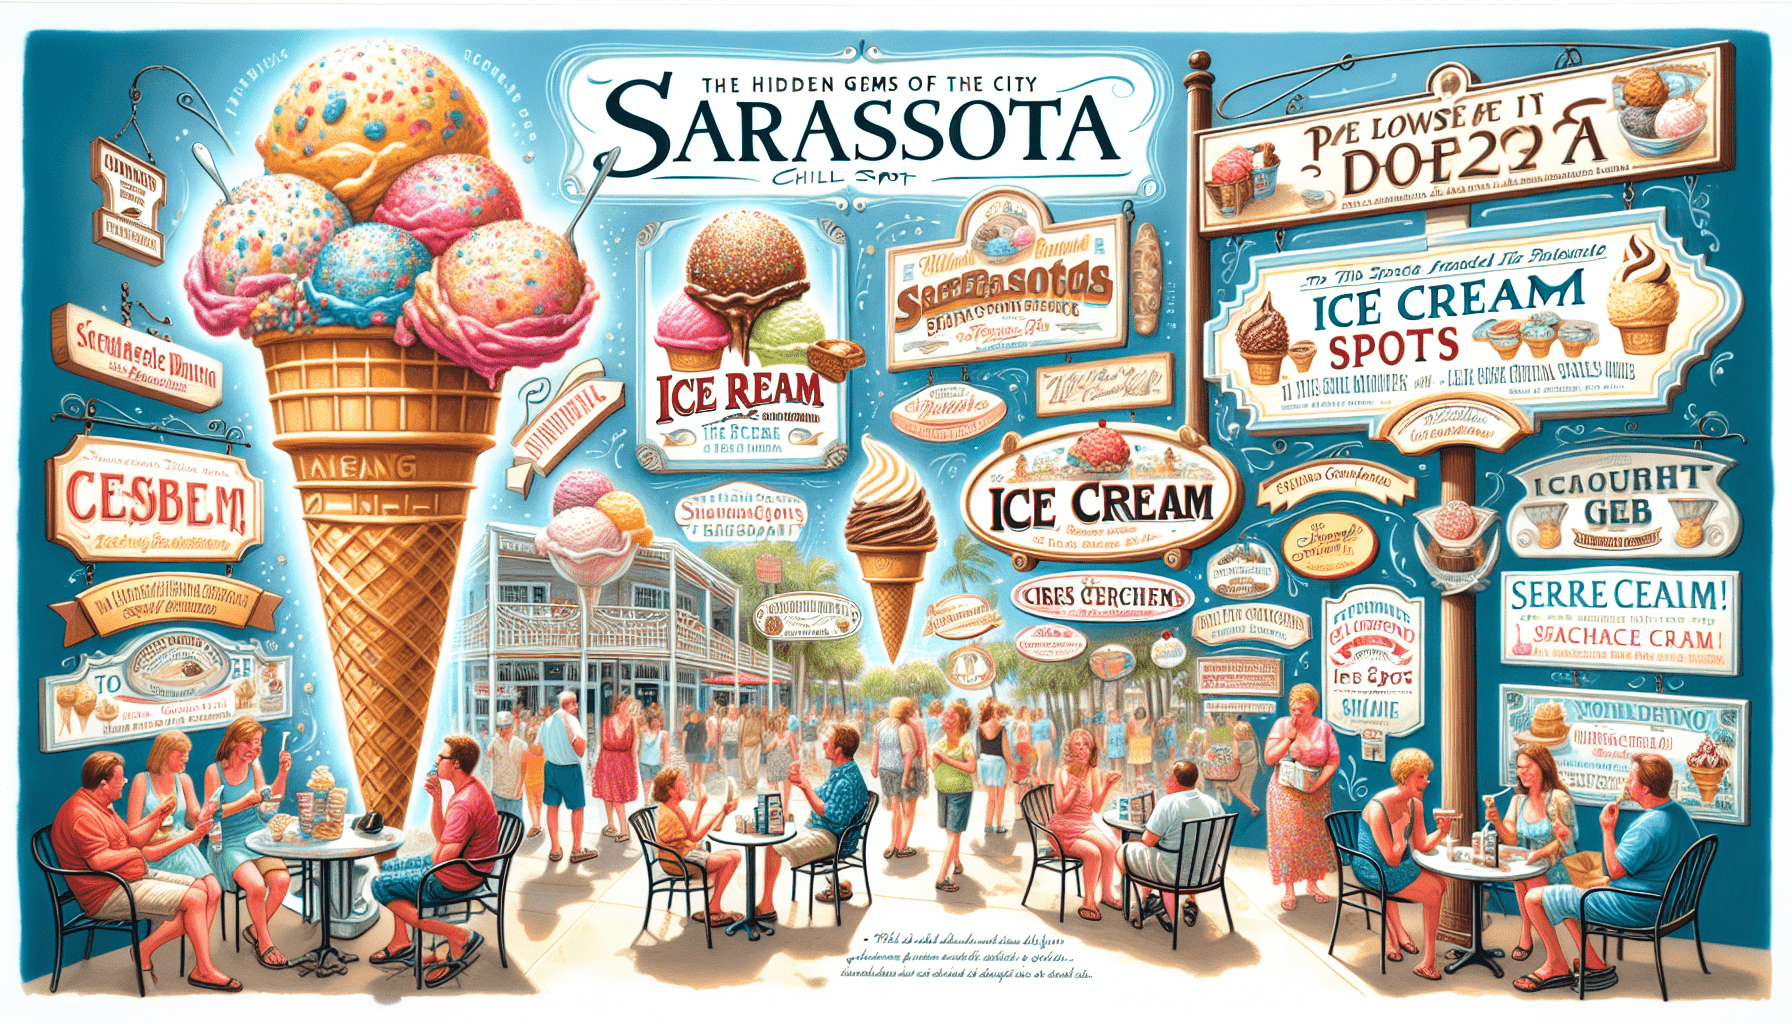 Discover the Best Ice Cream Spots in Sarasota